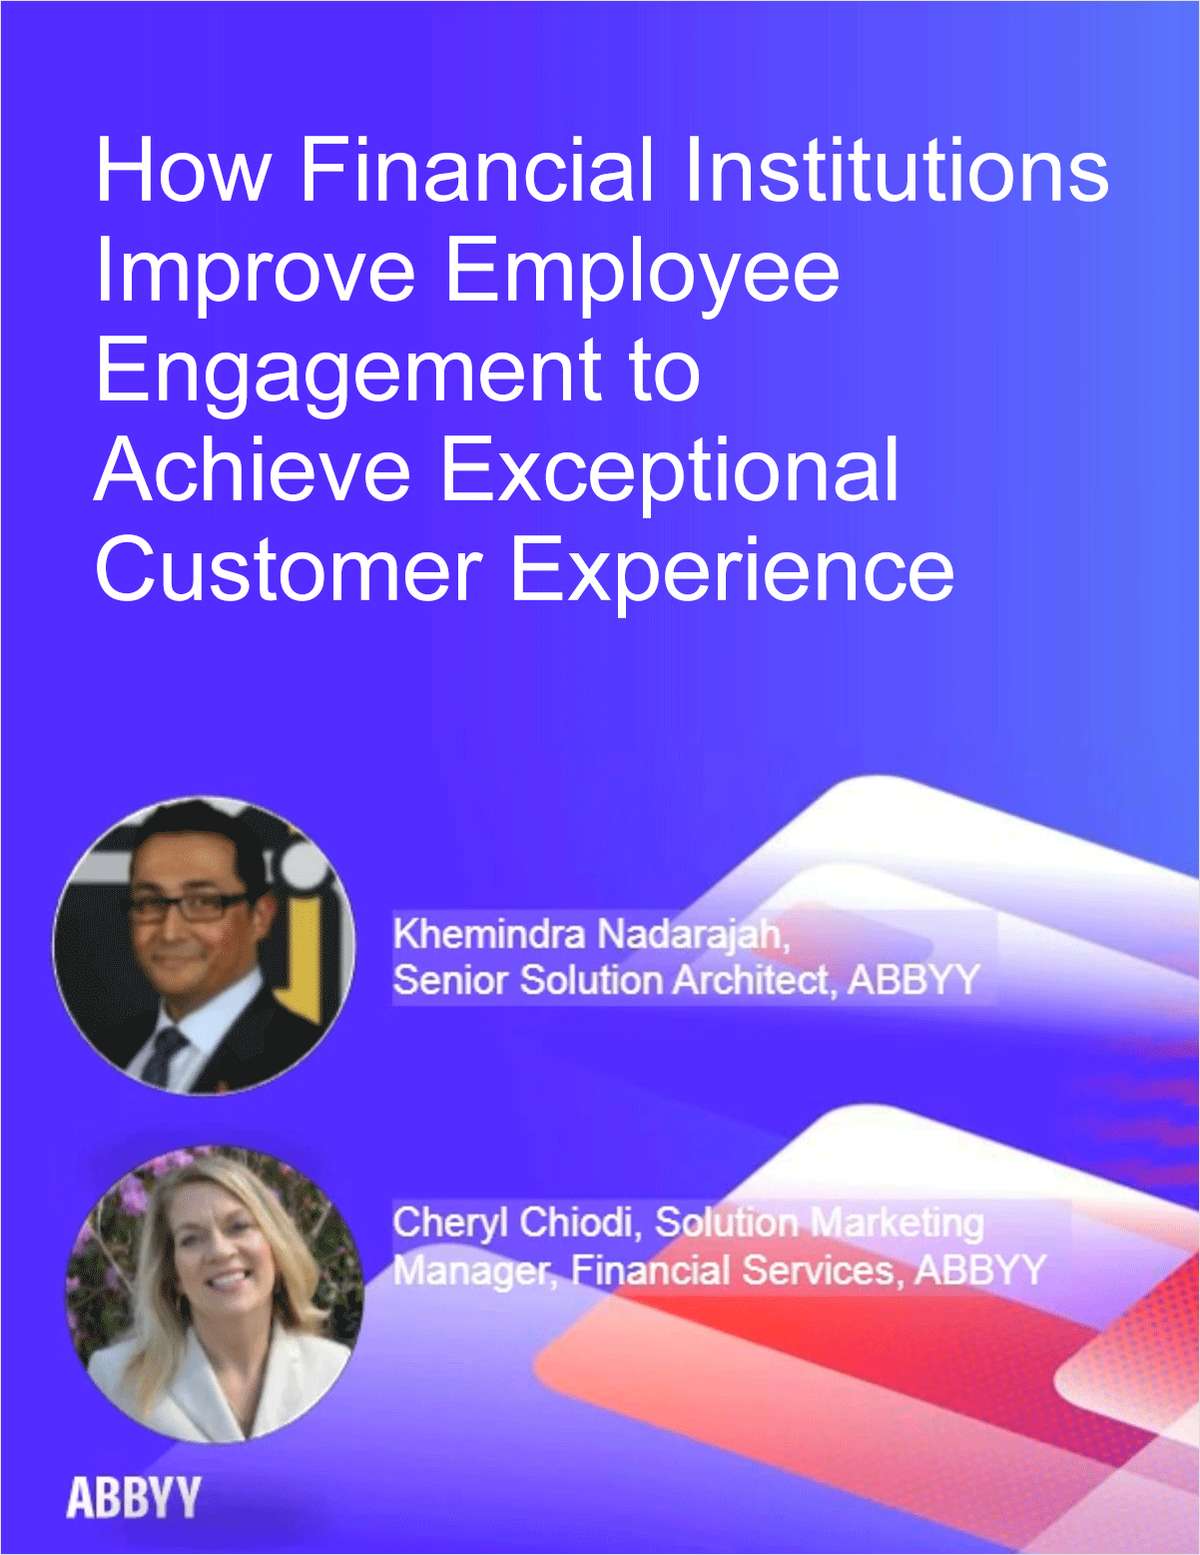 How Financial Institutions Improve Employee Engagement to Achieve Exceptional Customer Experience